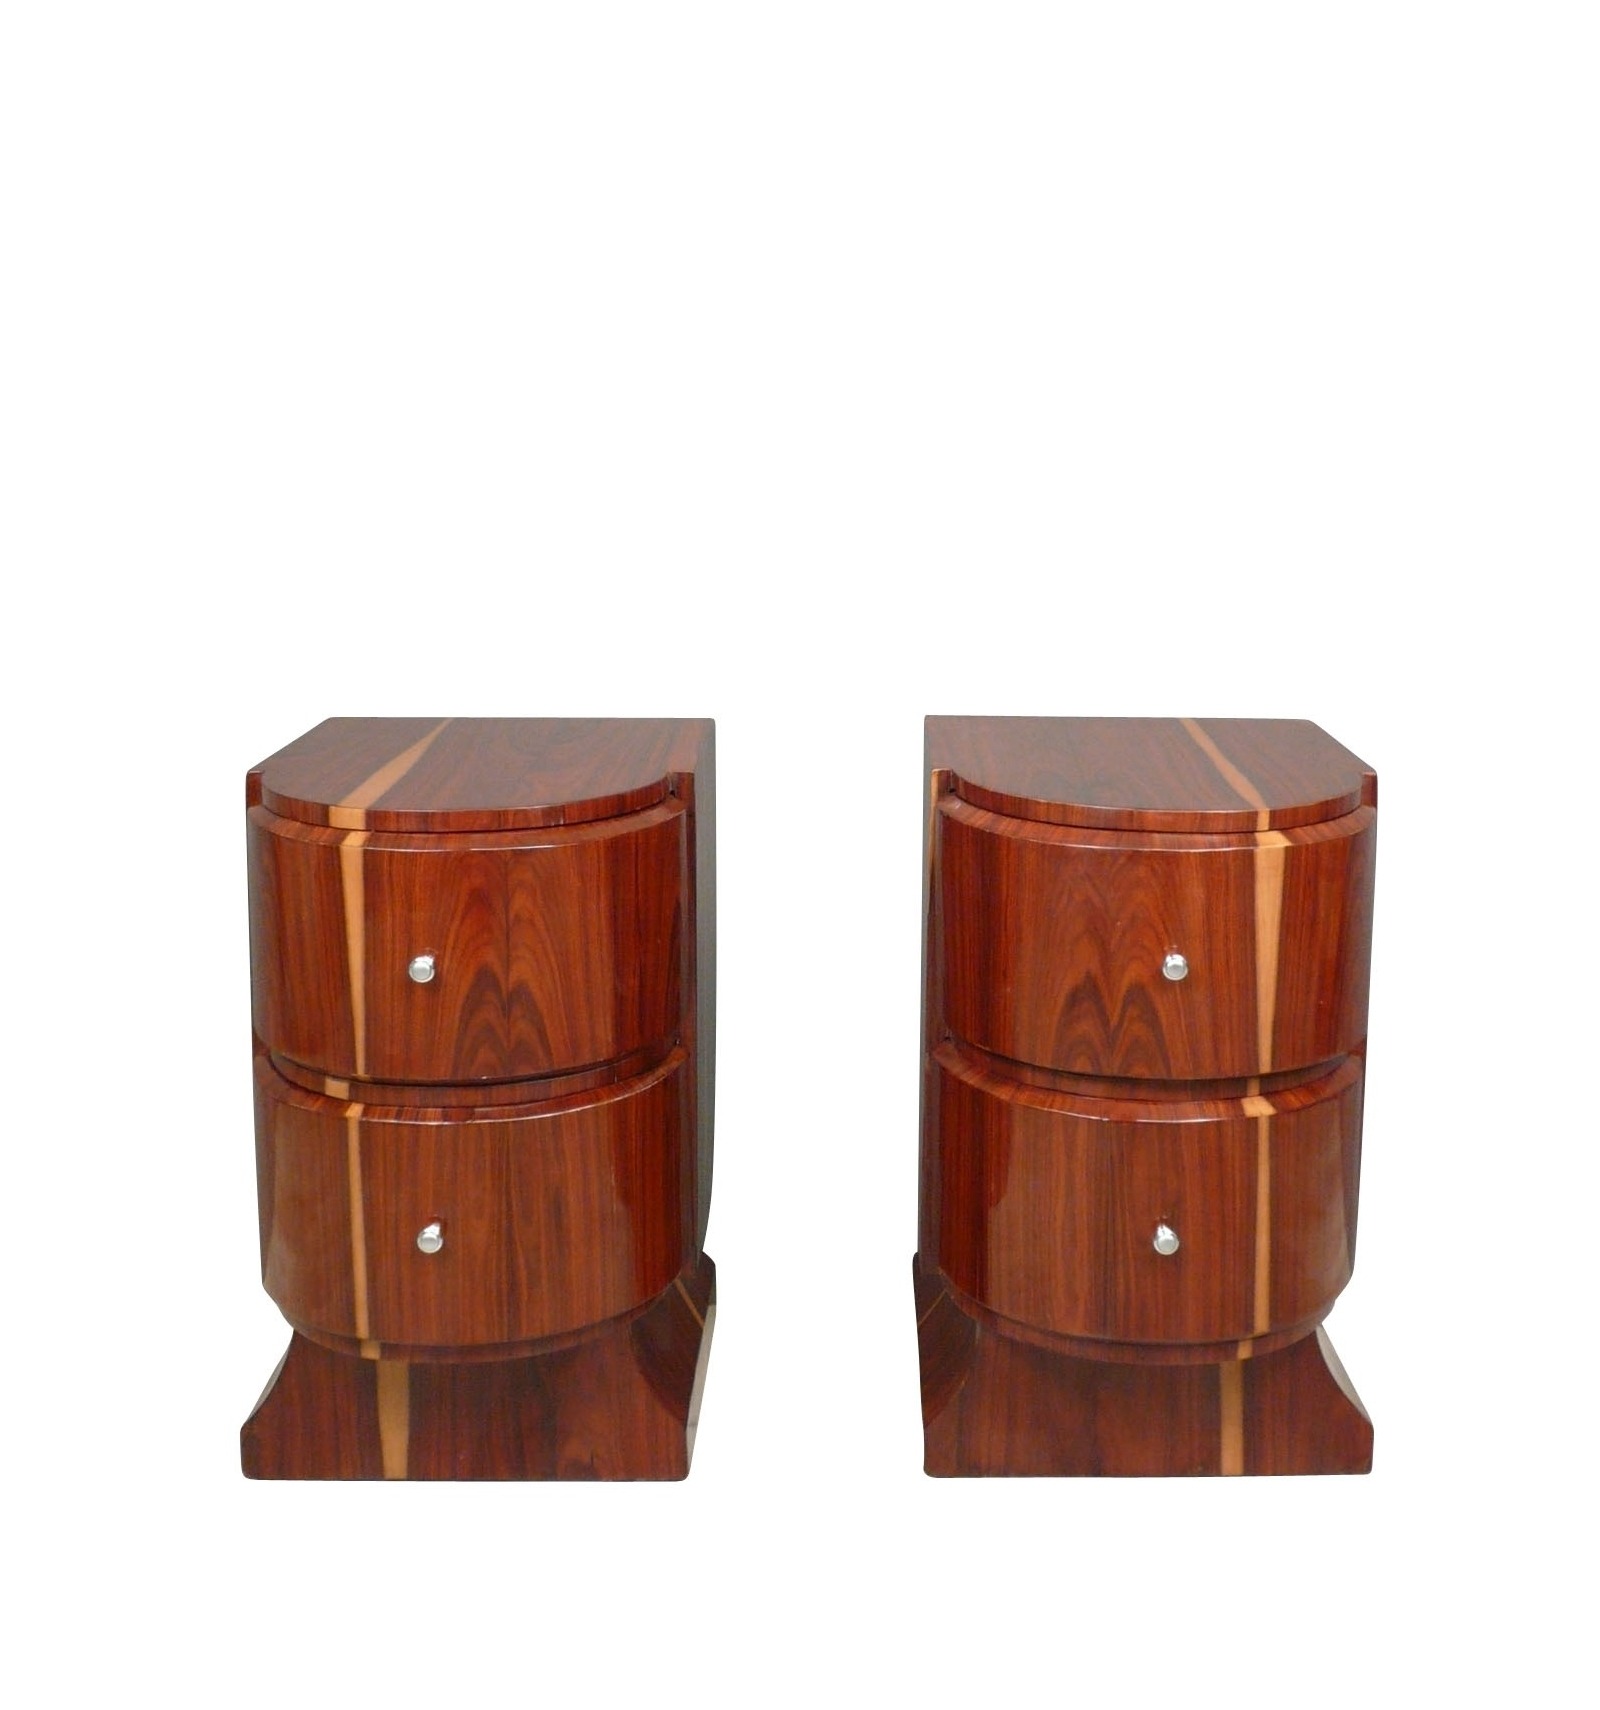 Deco Bedside Tables Top Sellers, 50% OFF | www.ingeniovirtual.com